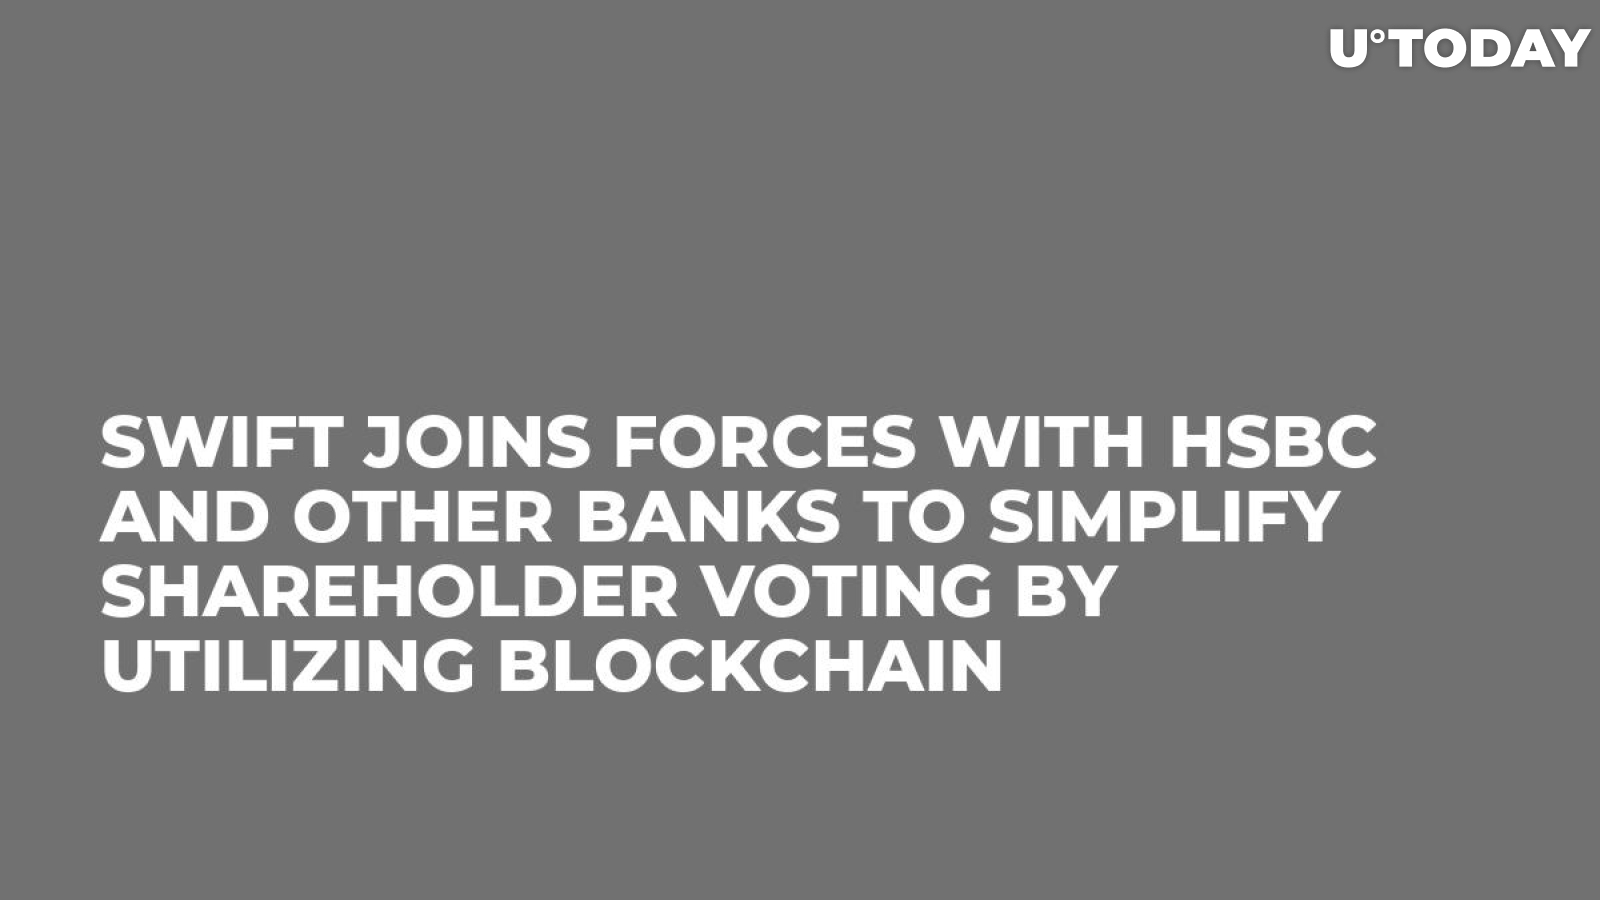 SWIFT Joins Forces with HSBC and Other Banks to Simplify Shareholder Voting by Utilizing Blockchain 